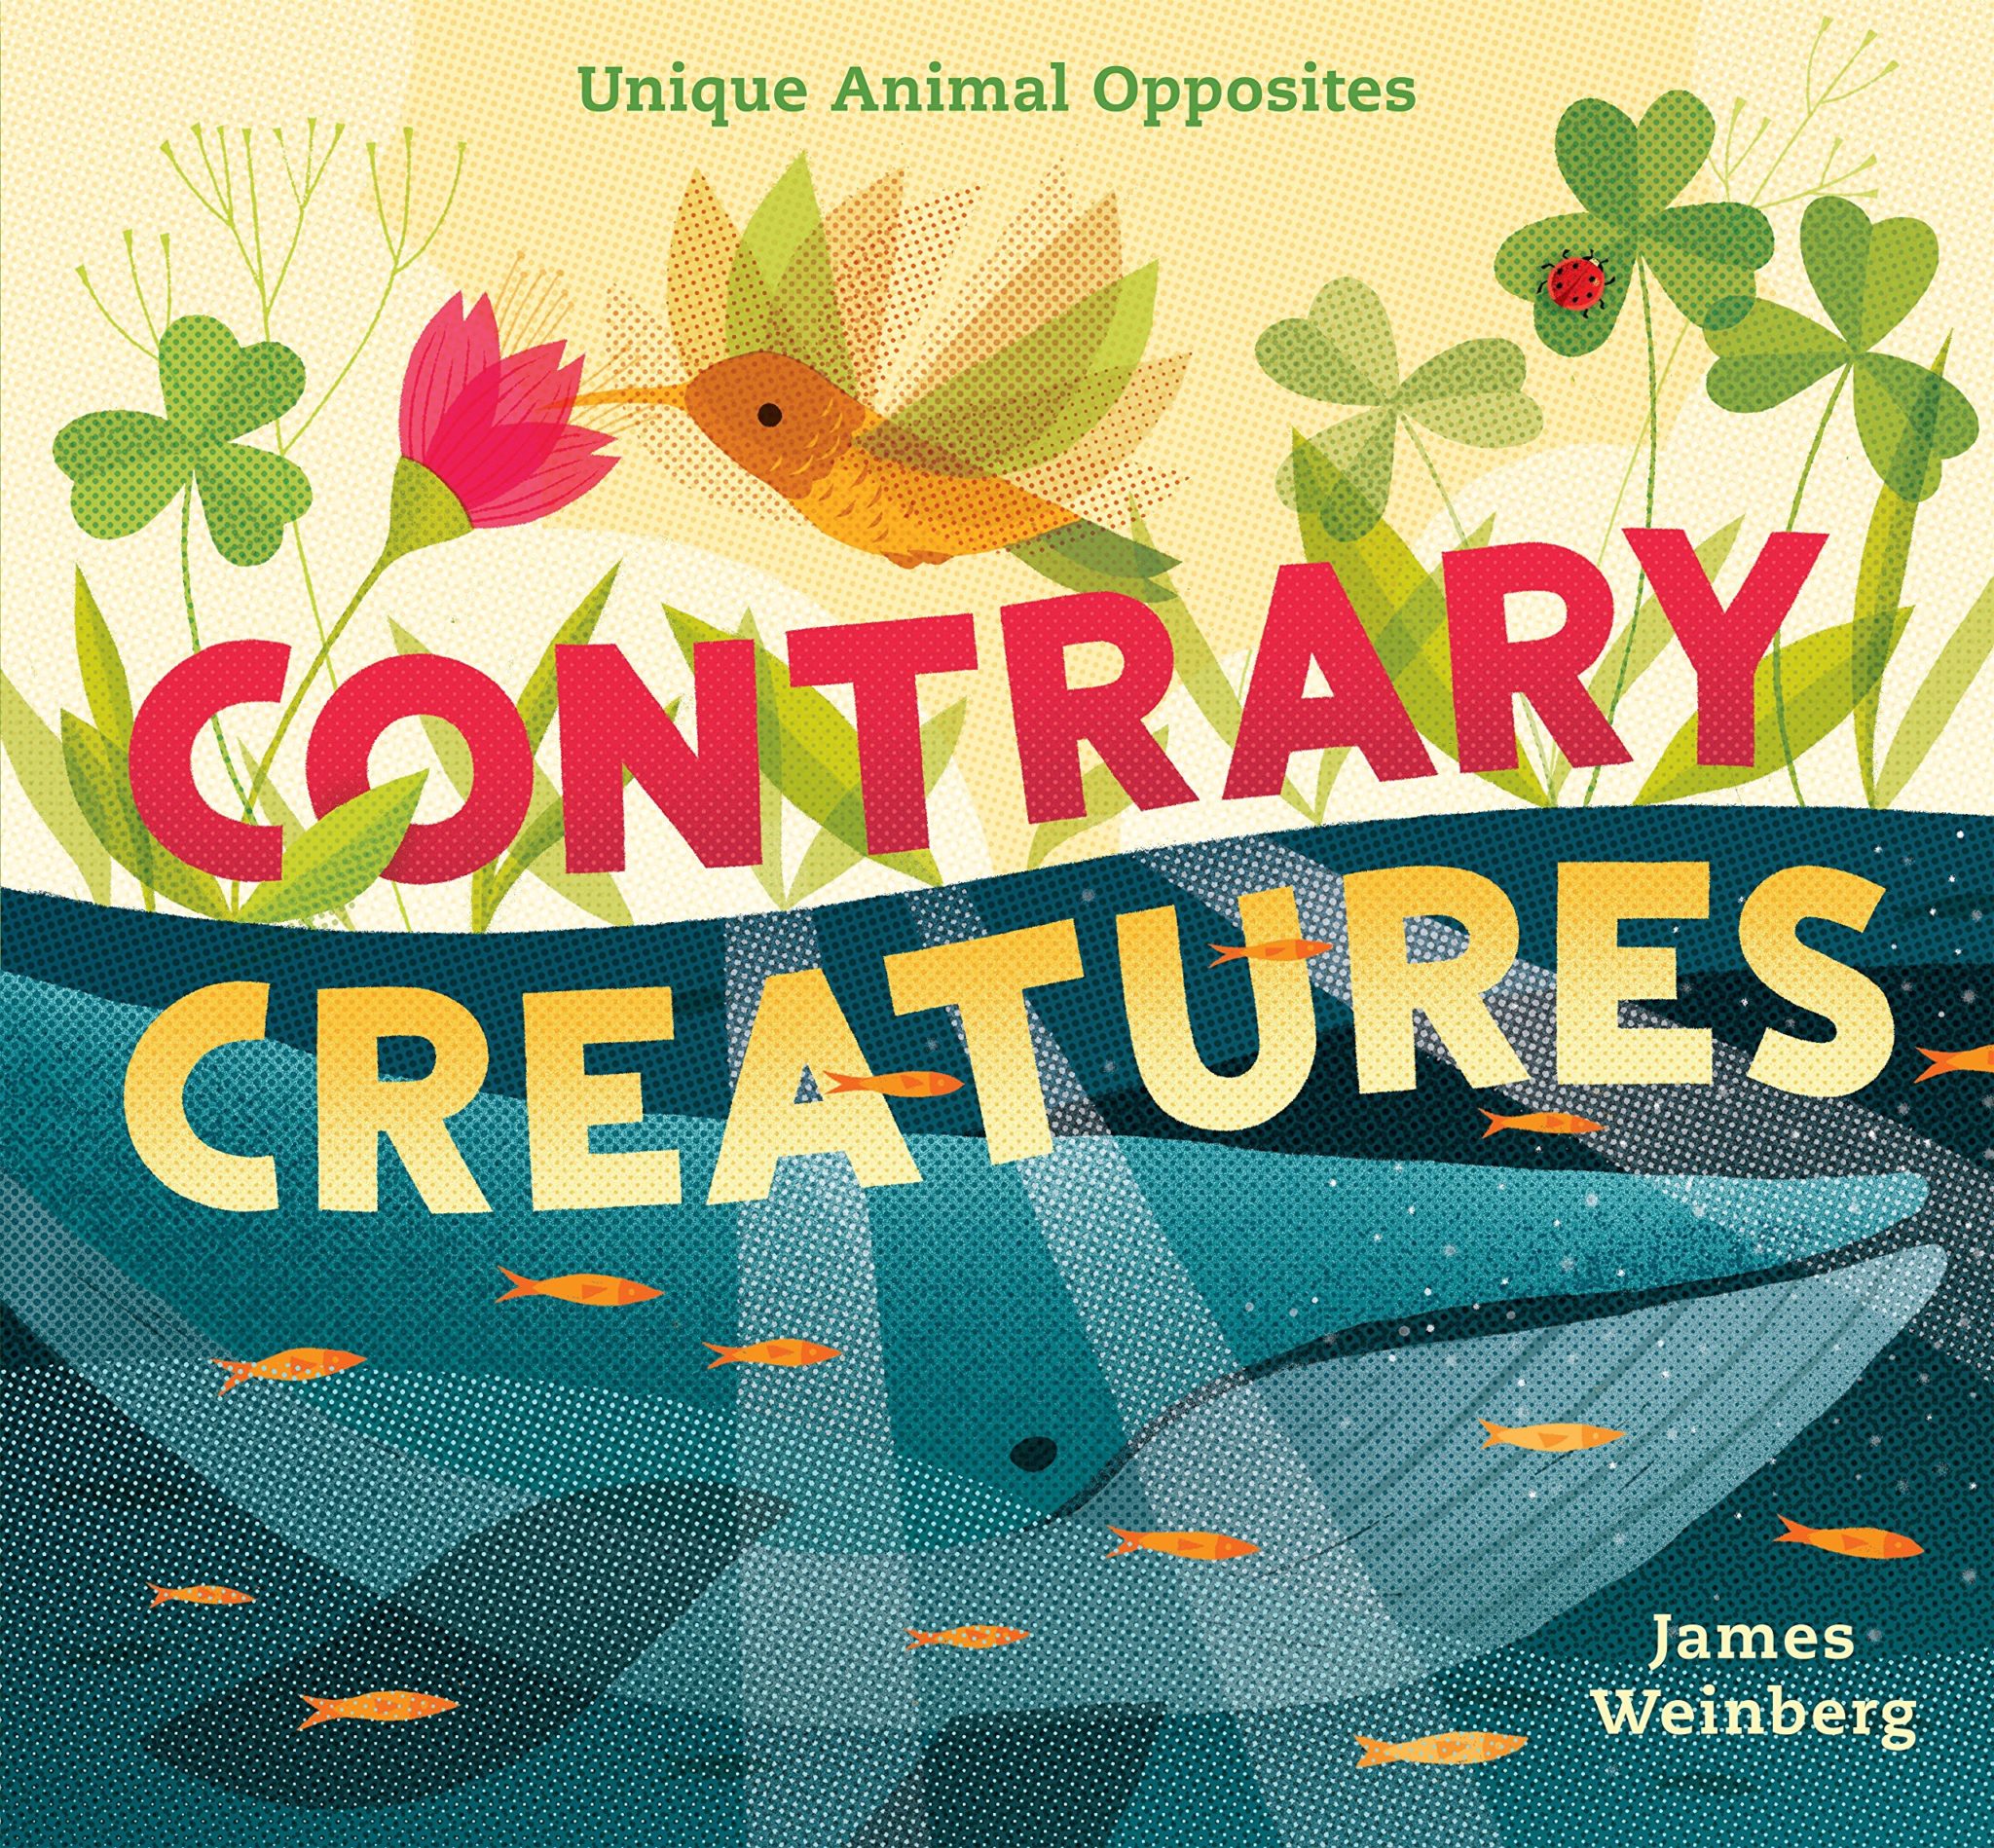 "Contrary Creatures" book cover